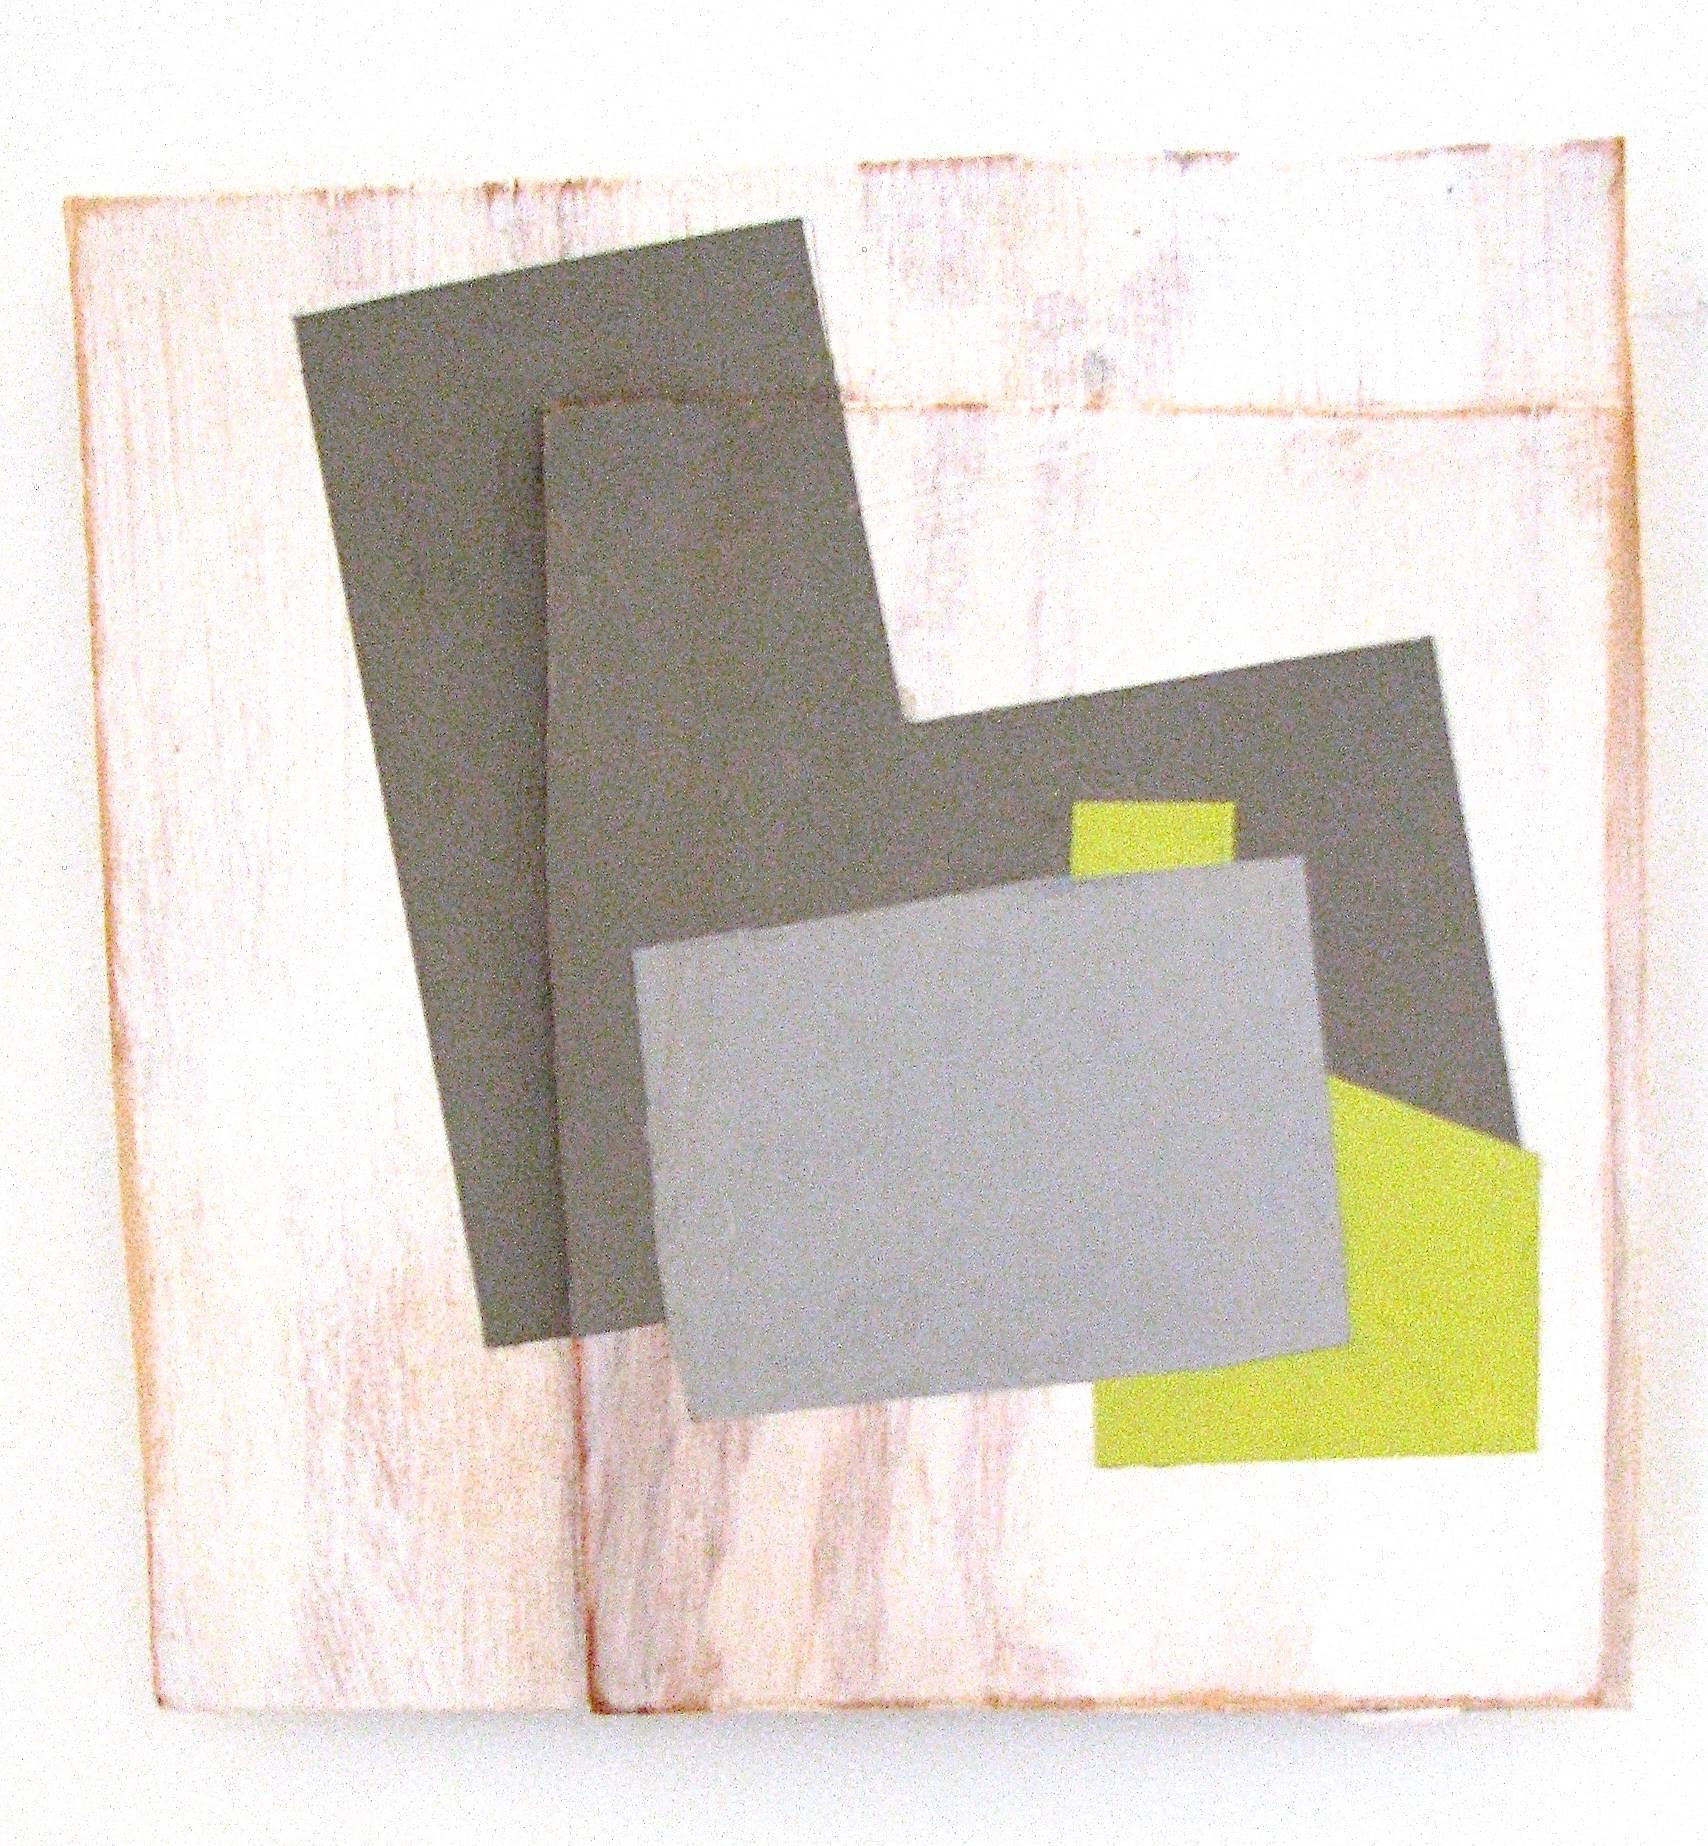 "Gentle" Abstract Oil Paint on Wood Modern Geometric Yellow Gray Mixed Media - Mixed Media Art by Jean Feinberg